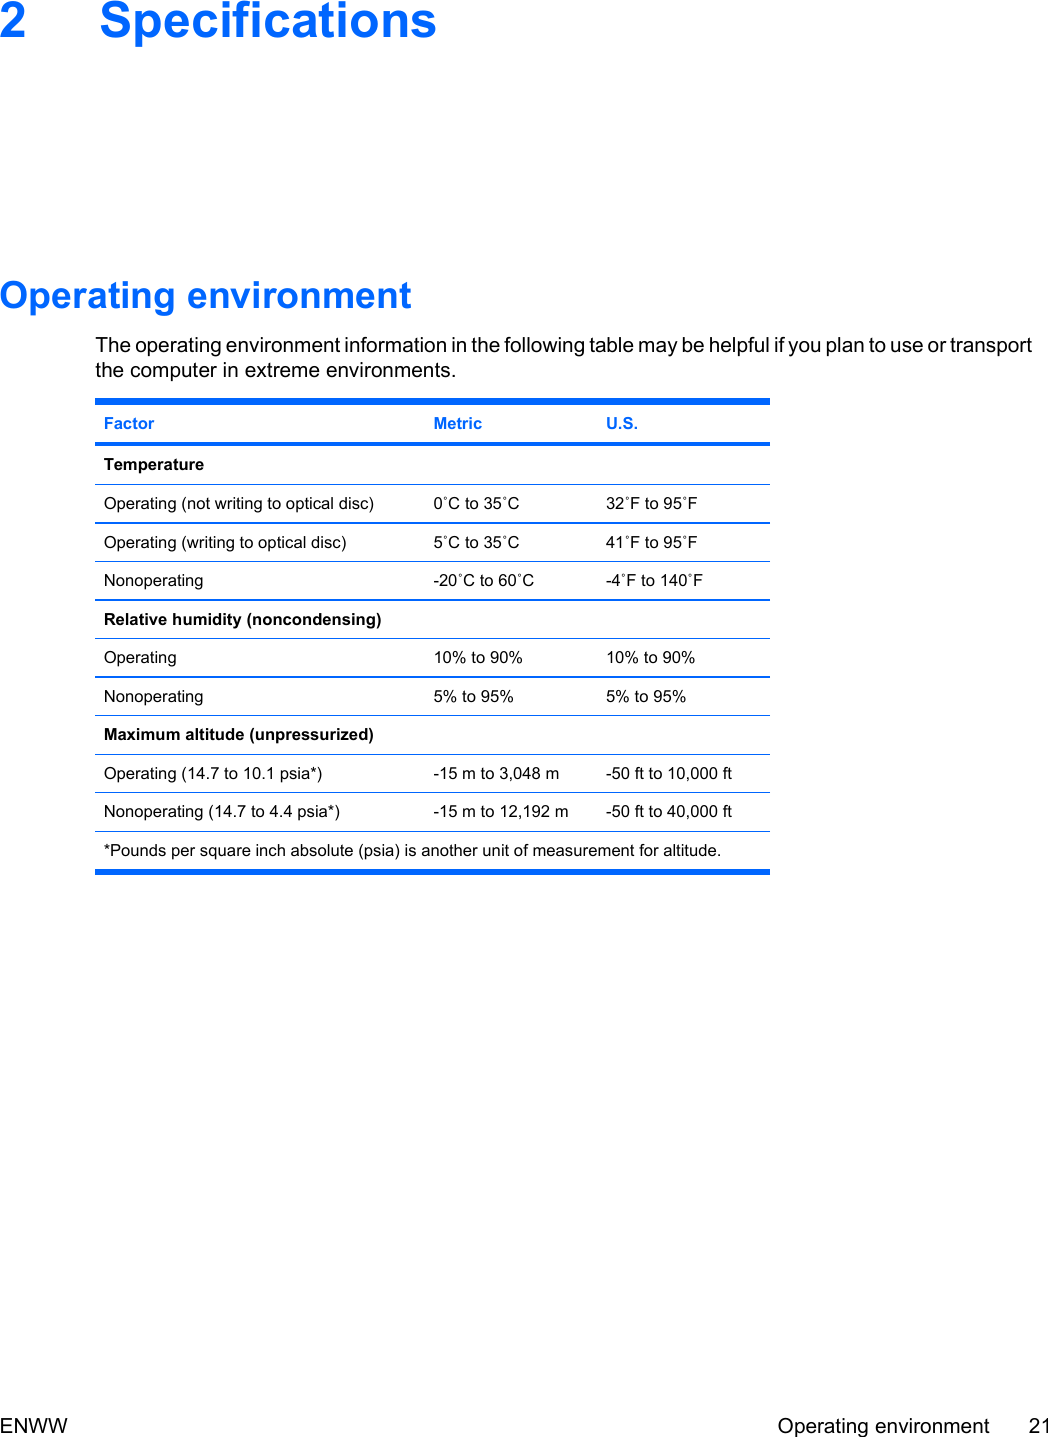 2 SpecificationsOperating environmentThe operating environment information in the following table may be helpful if you plan to use or transportthe computer in extreme environments.Factor Metric U.S.TemperatureOperating (not writing to optical disc) 0˚C to 35˚C32˚F to 95˚FOperating (writing to optical disc) 5˚C to 35˚C41˚F to 95˚FNonoperating -20˚C to 60˚C-4˚F to 140˚FRelative humidity (noncondensing)Operating 10% to 90% 10% to 90%Nonoperating 5% to 95% 5% to 95%Maximum altitude (unpressurized)Operating (14.7 to 10.1 psia*) -15 m to 3,048 m -50 ft to 10,000 ftNonoperating (14.7 to 4.4 psia*) -15 m to 12,192 m -50 ft to 40,000 ft*Pounds per square inch absolute (psia) is another unit of measurement for altitude.ENWW Operating environment 21